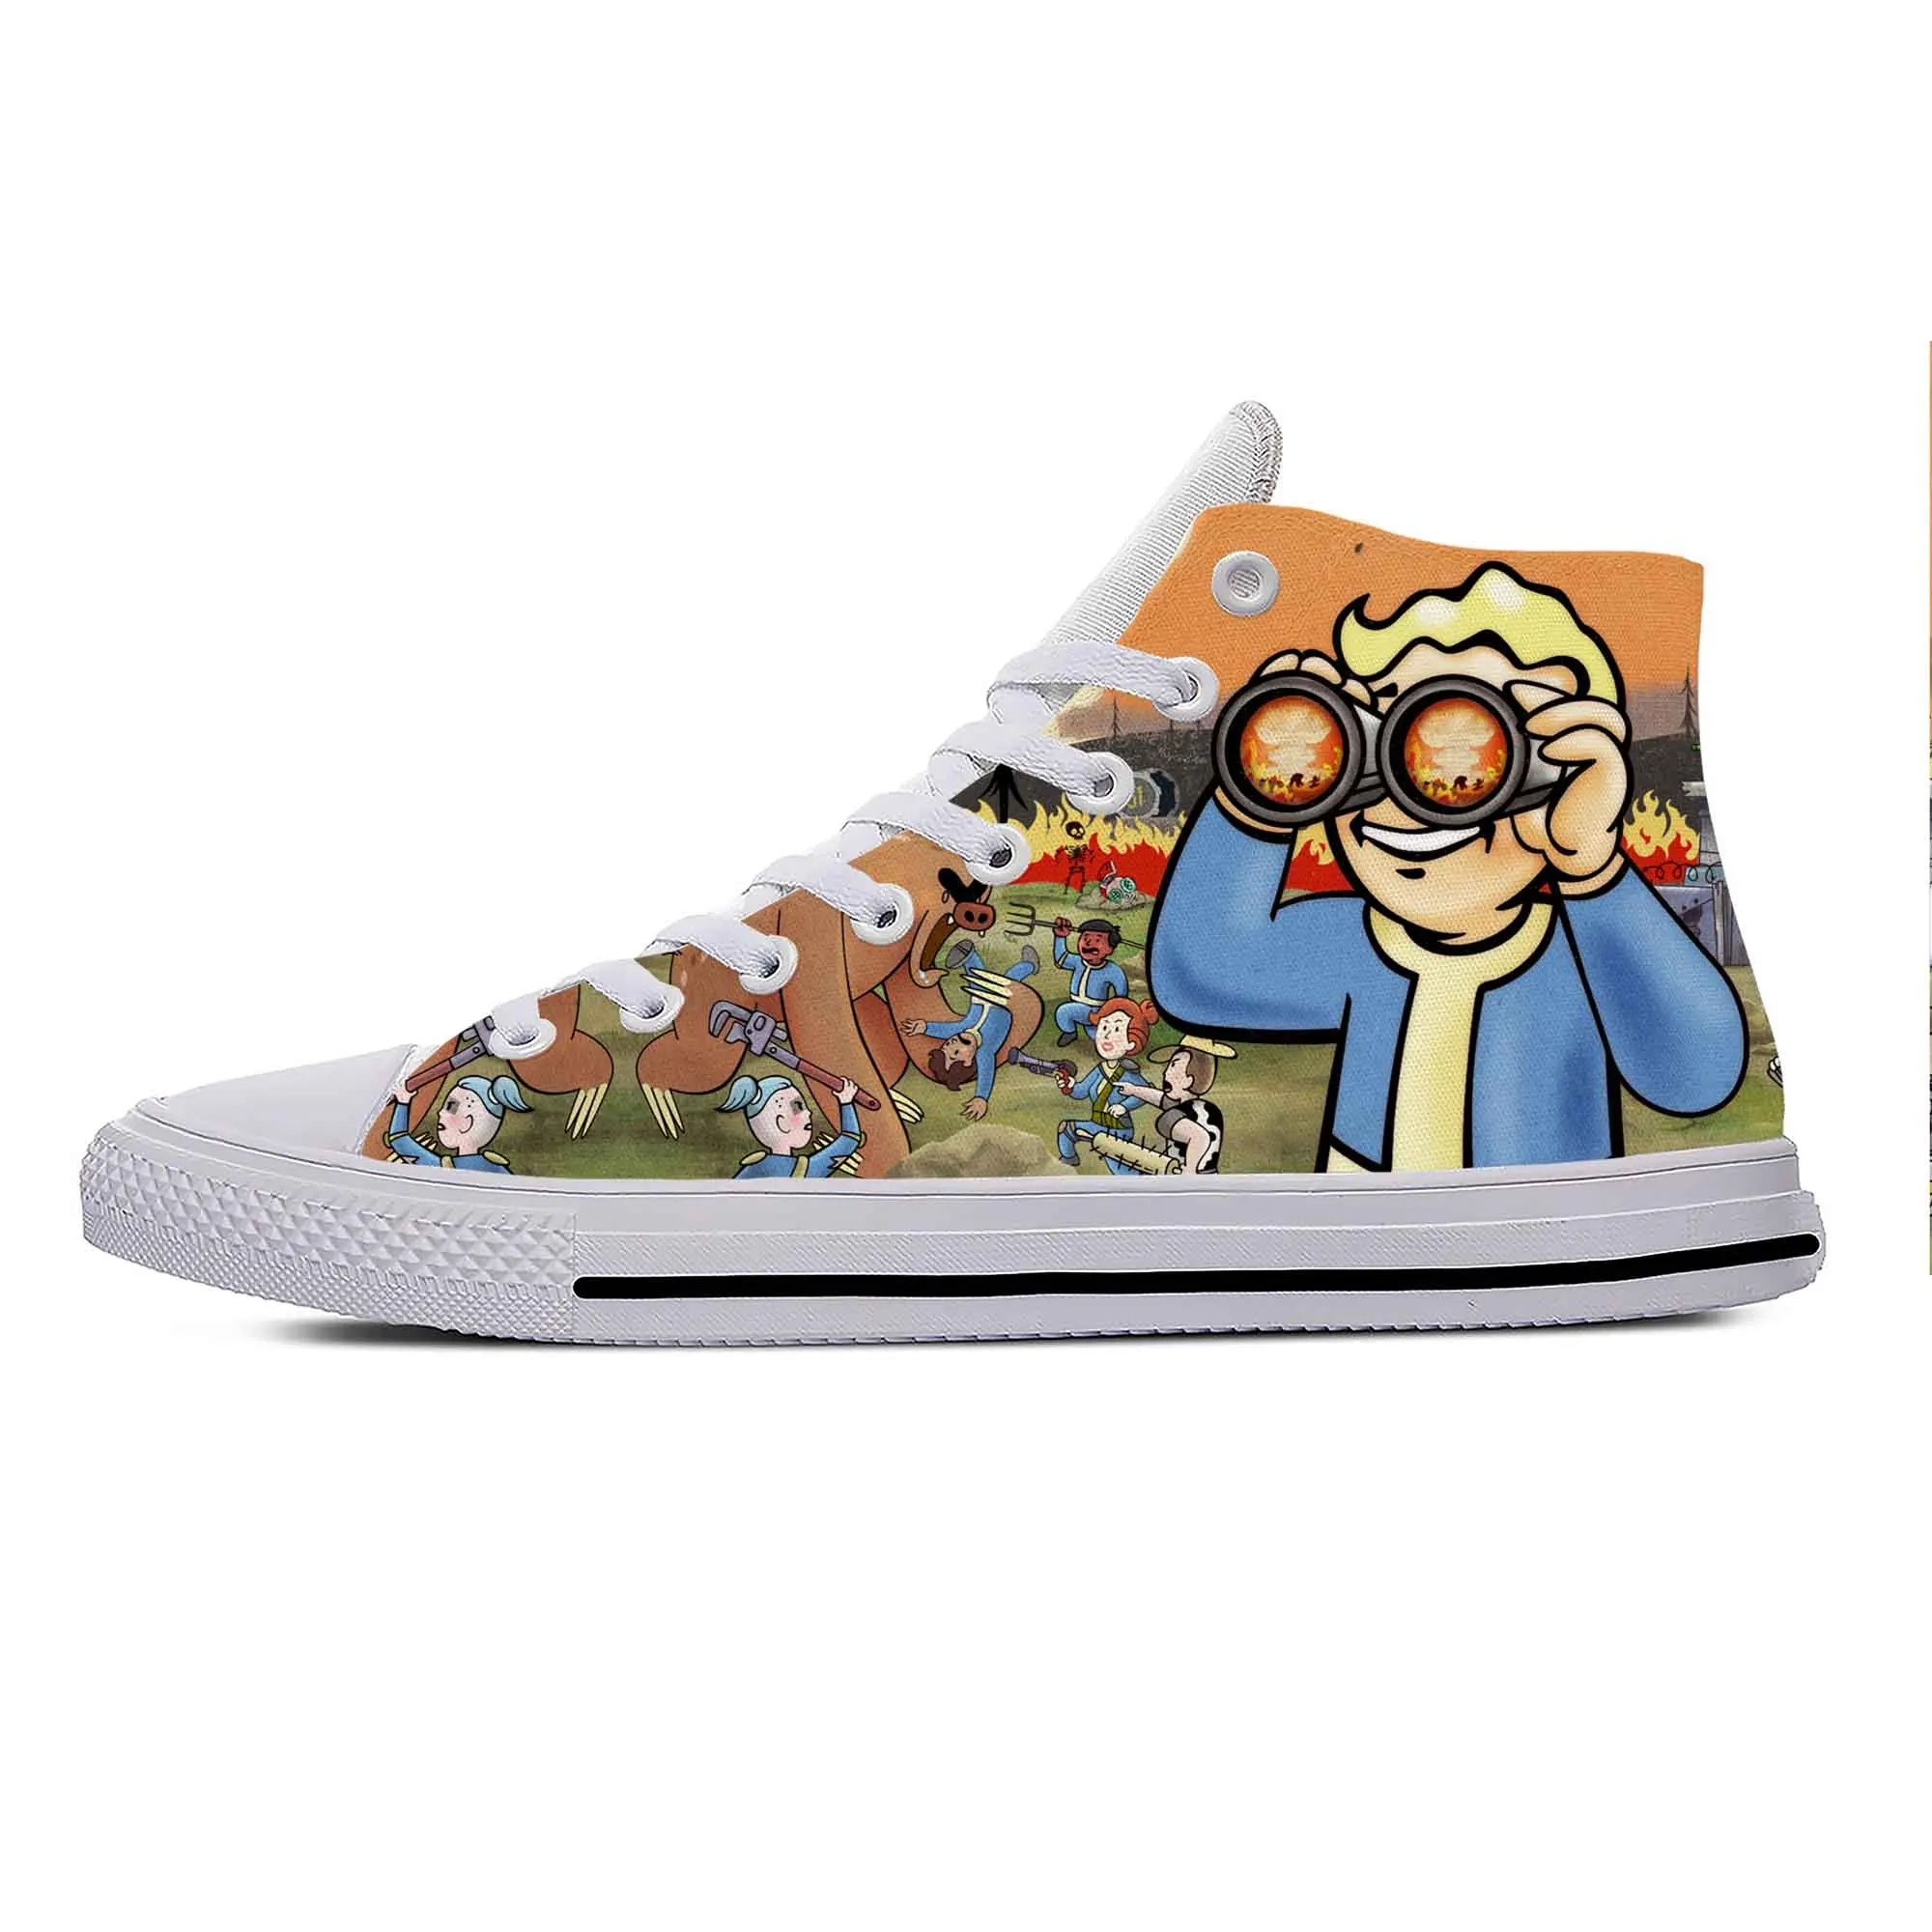 

Game Anime Cartoon Manga Fallout Vault Pip Boy Casual Cloth Shoes High Top Lightweight Breathable 3D Print Men Women Sneakers